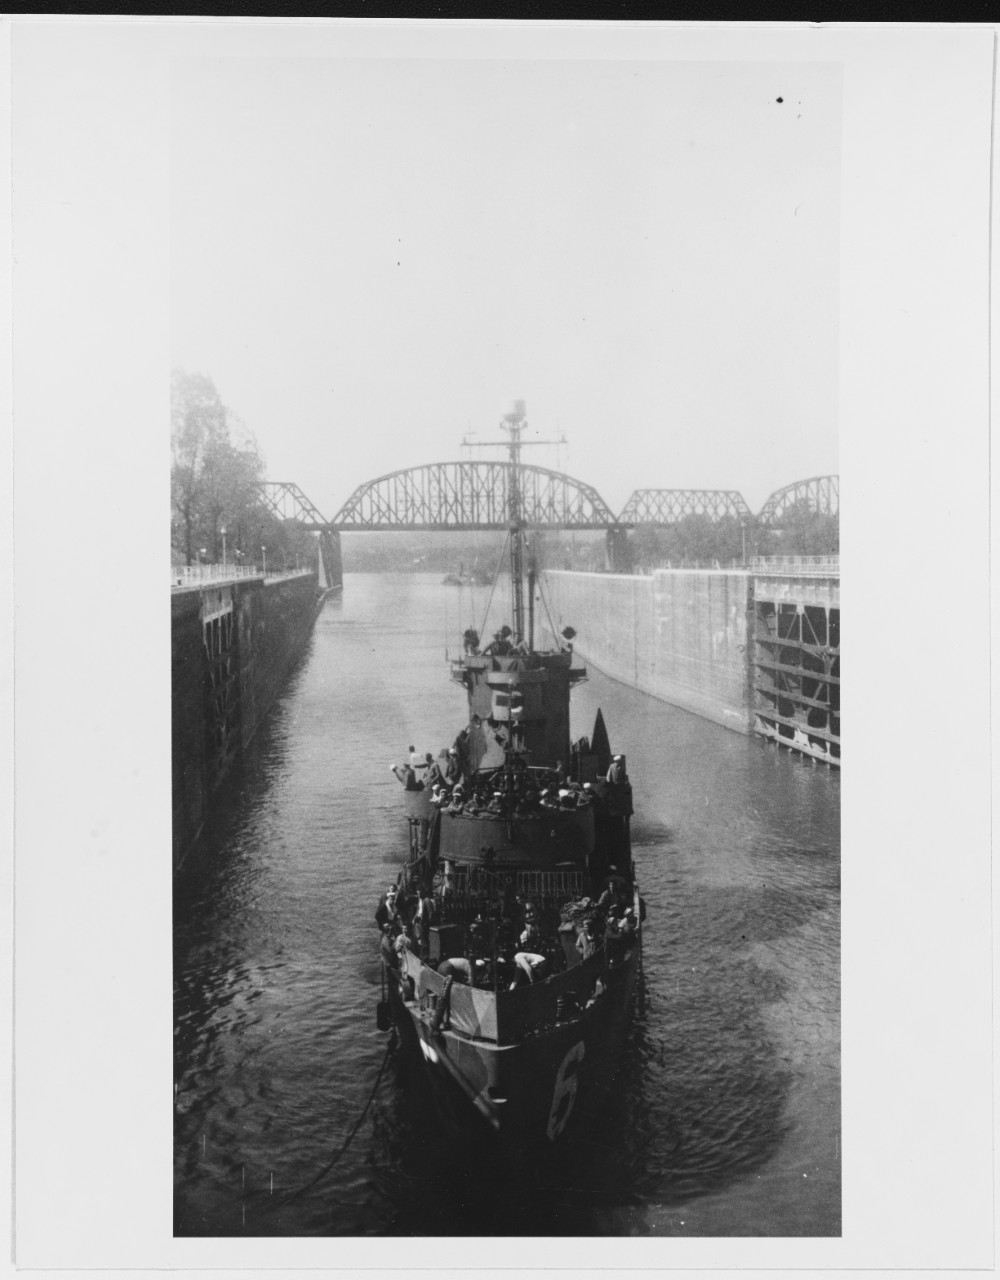 USS LCS-6 photographed from LSM(R)-509 in Lock 41 on the Ohio River, on October 13, 1945